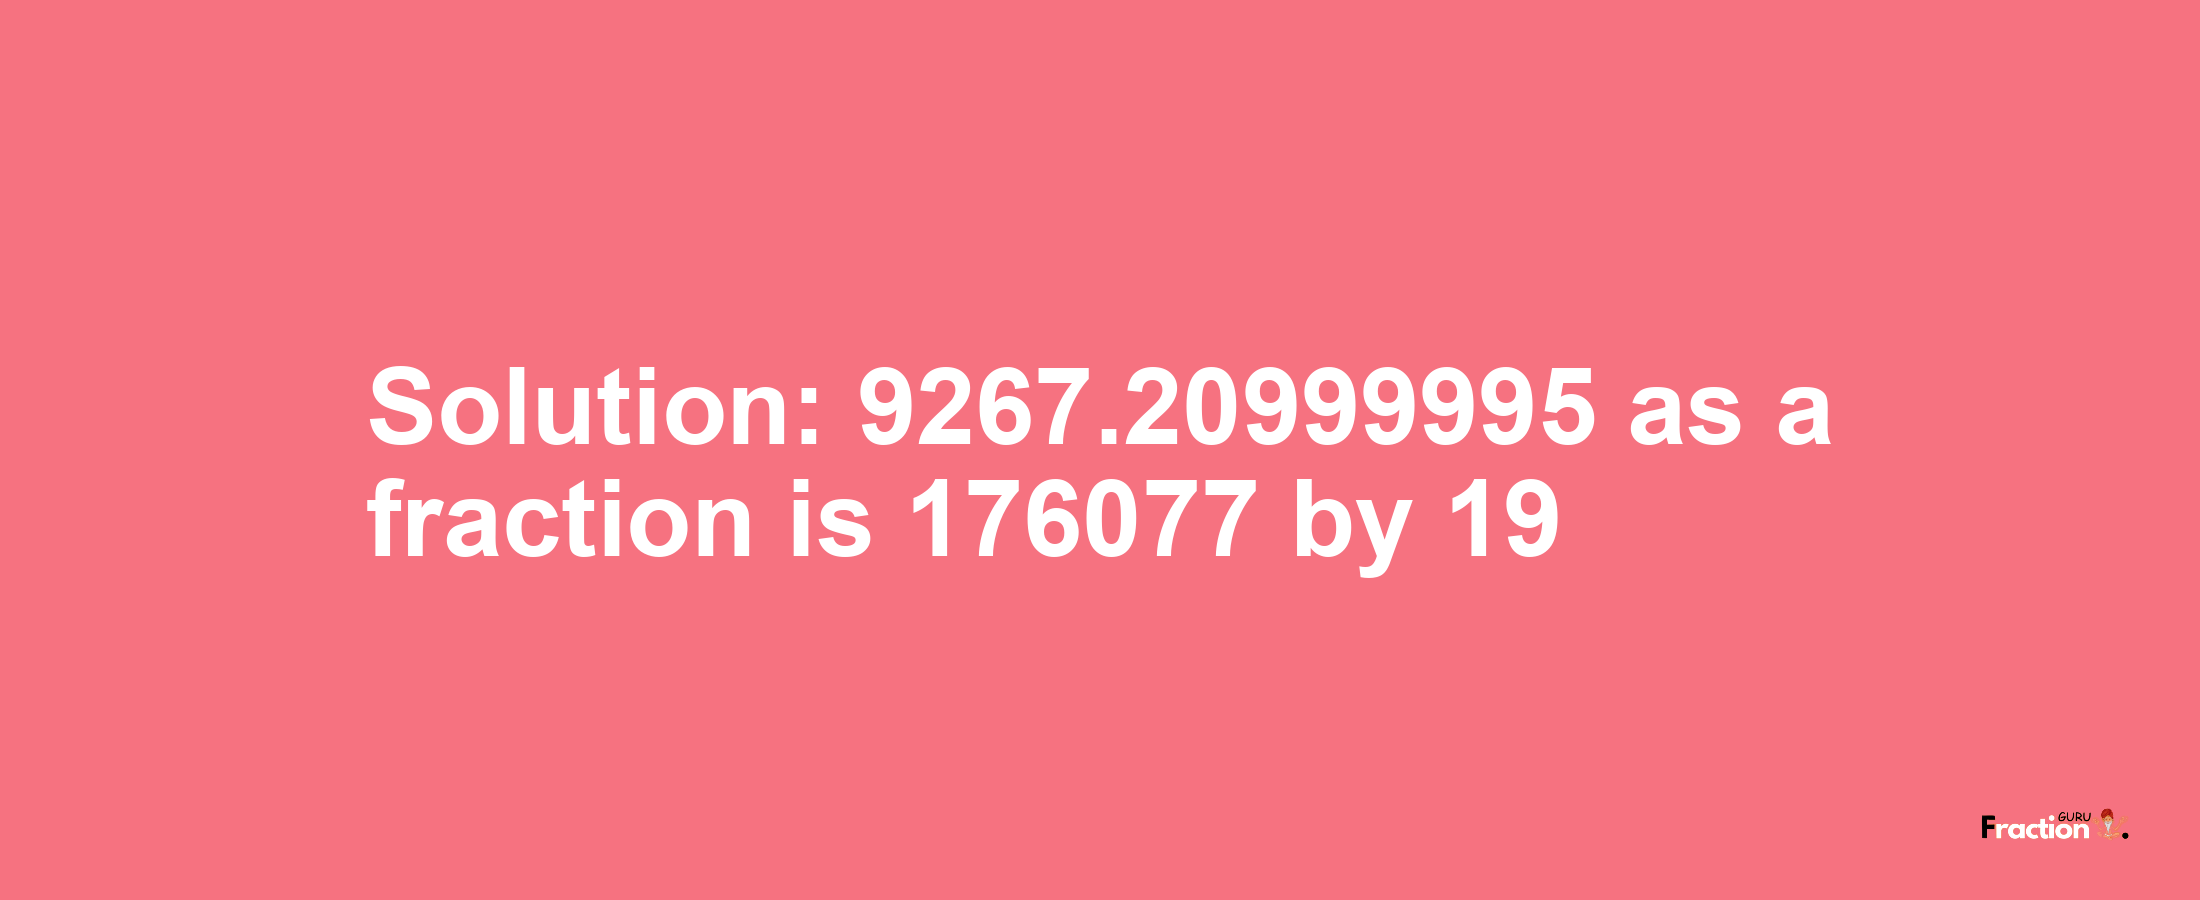 Solution:9267.20999995 as a fraction is 176077/19